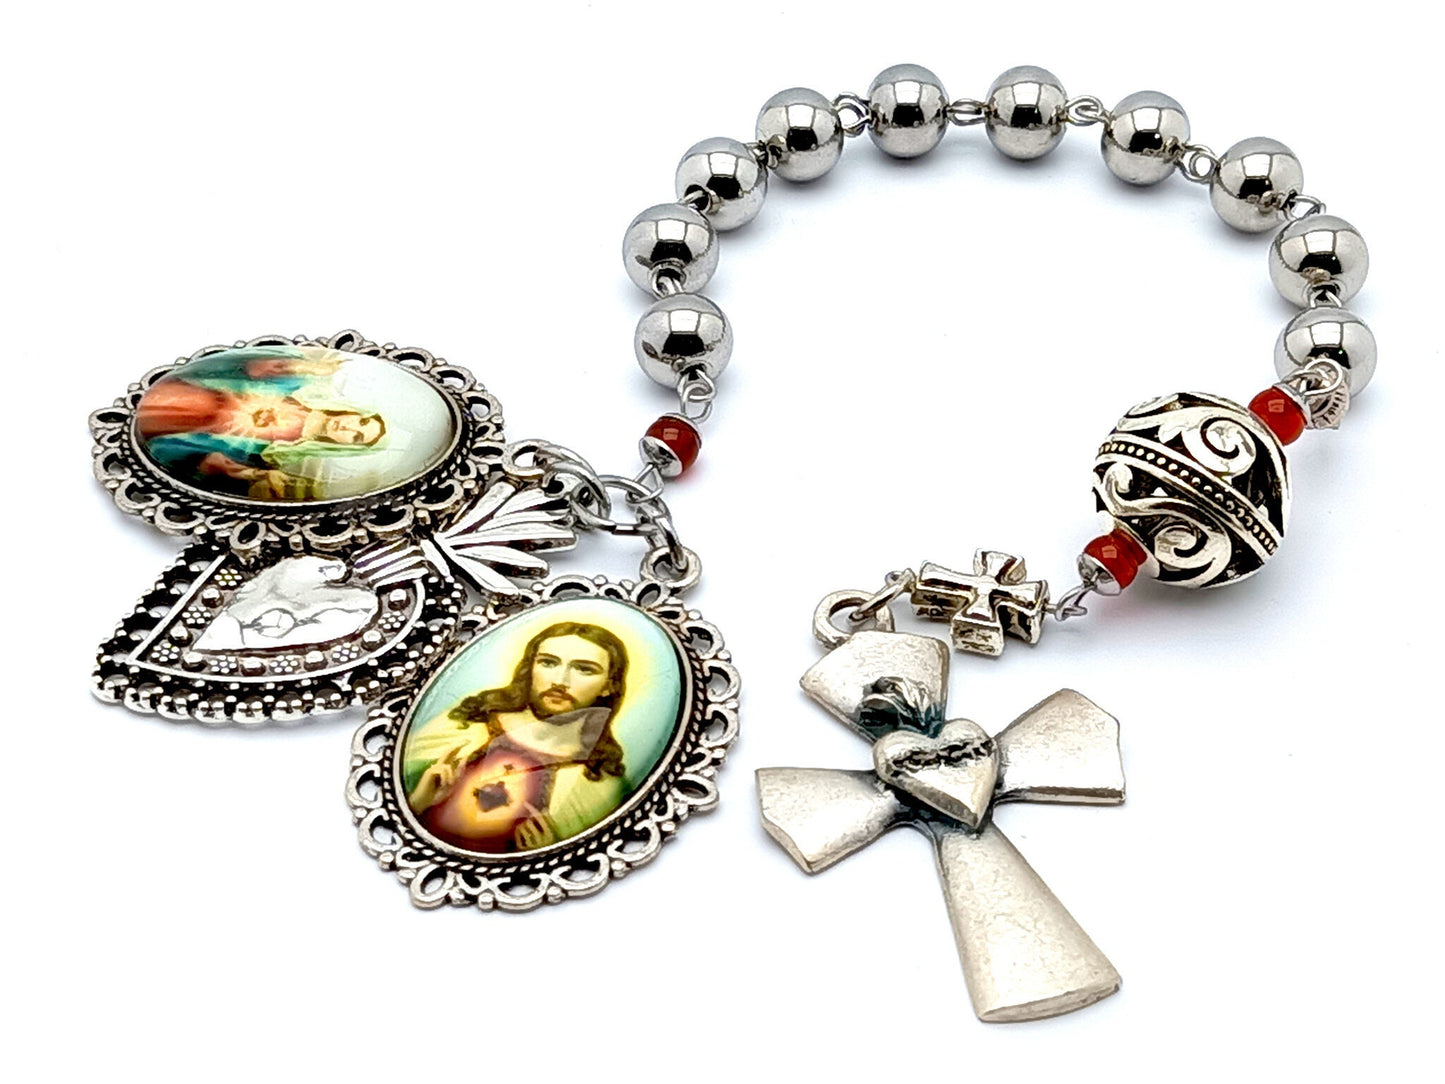 Sacred Heart of Jesus and Immaculate heart of Mary unique rosary beads single deacde rosary with stainless steel beads and Sacred Heart crucifix and medals.